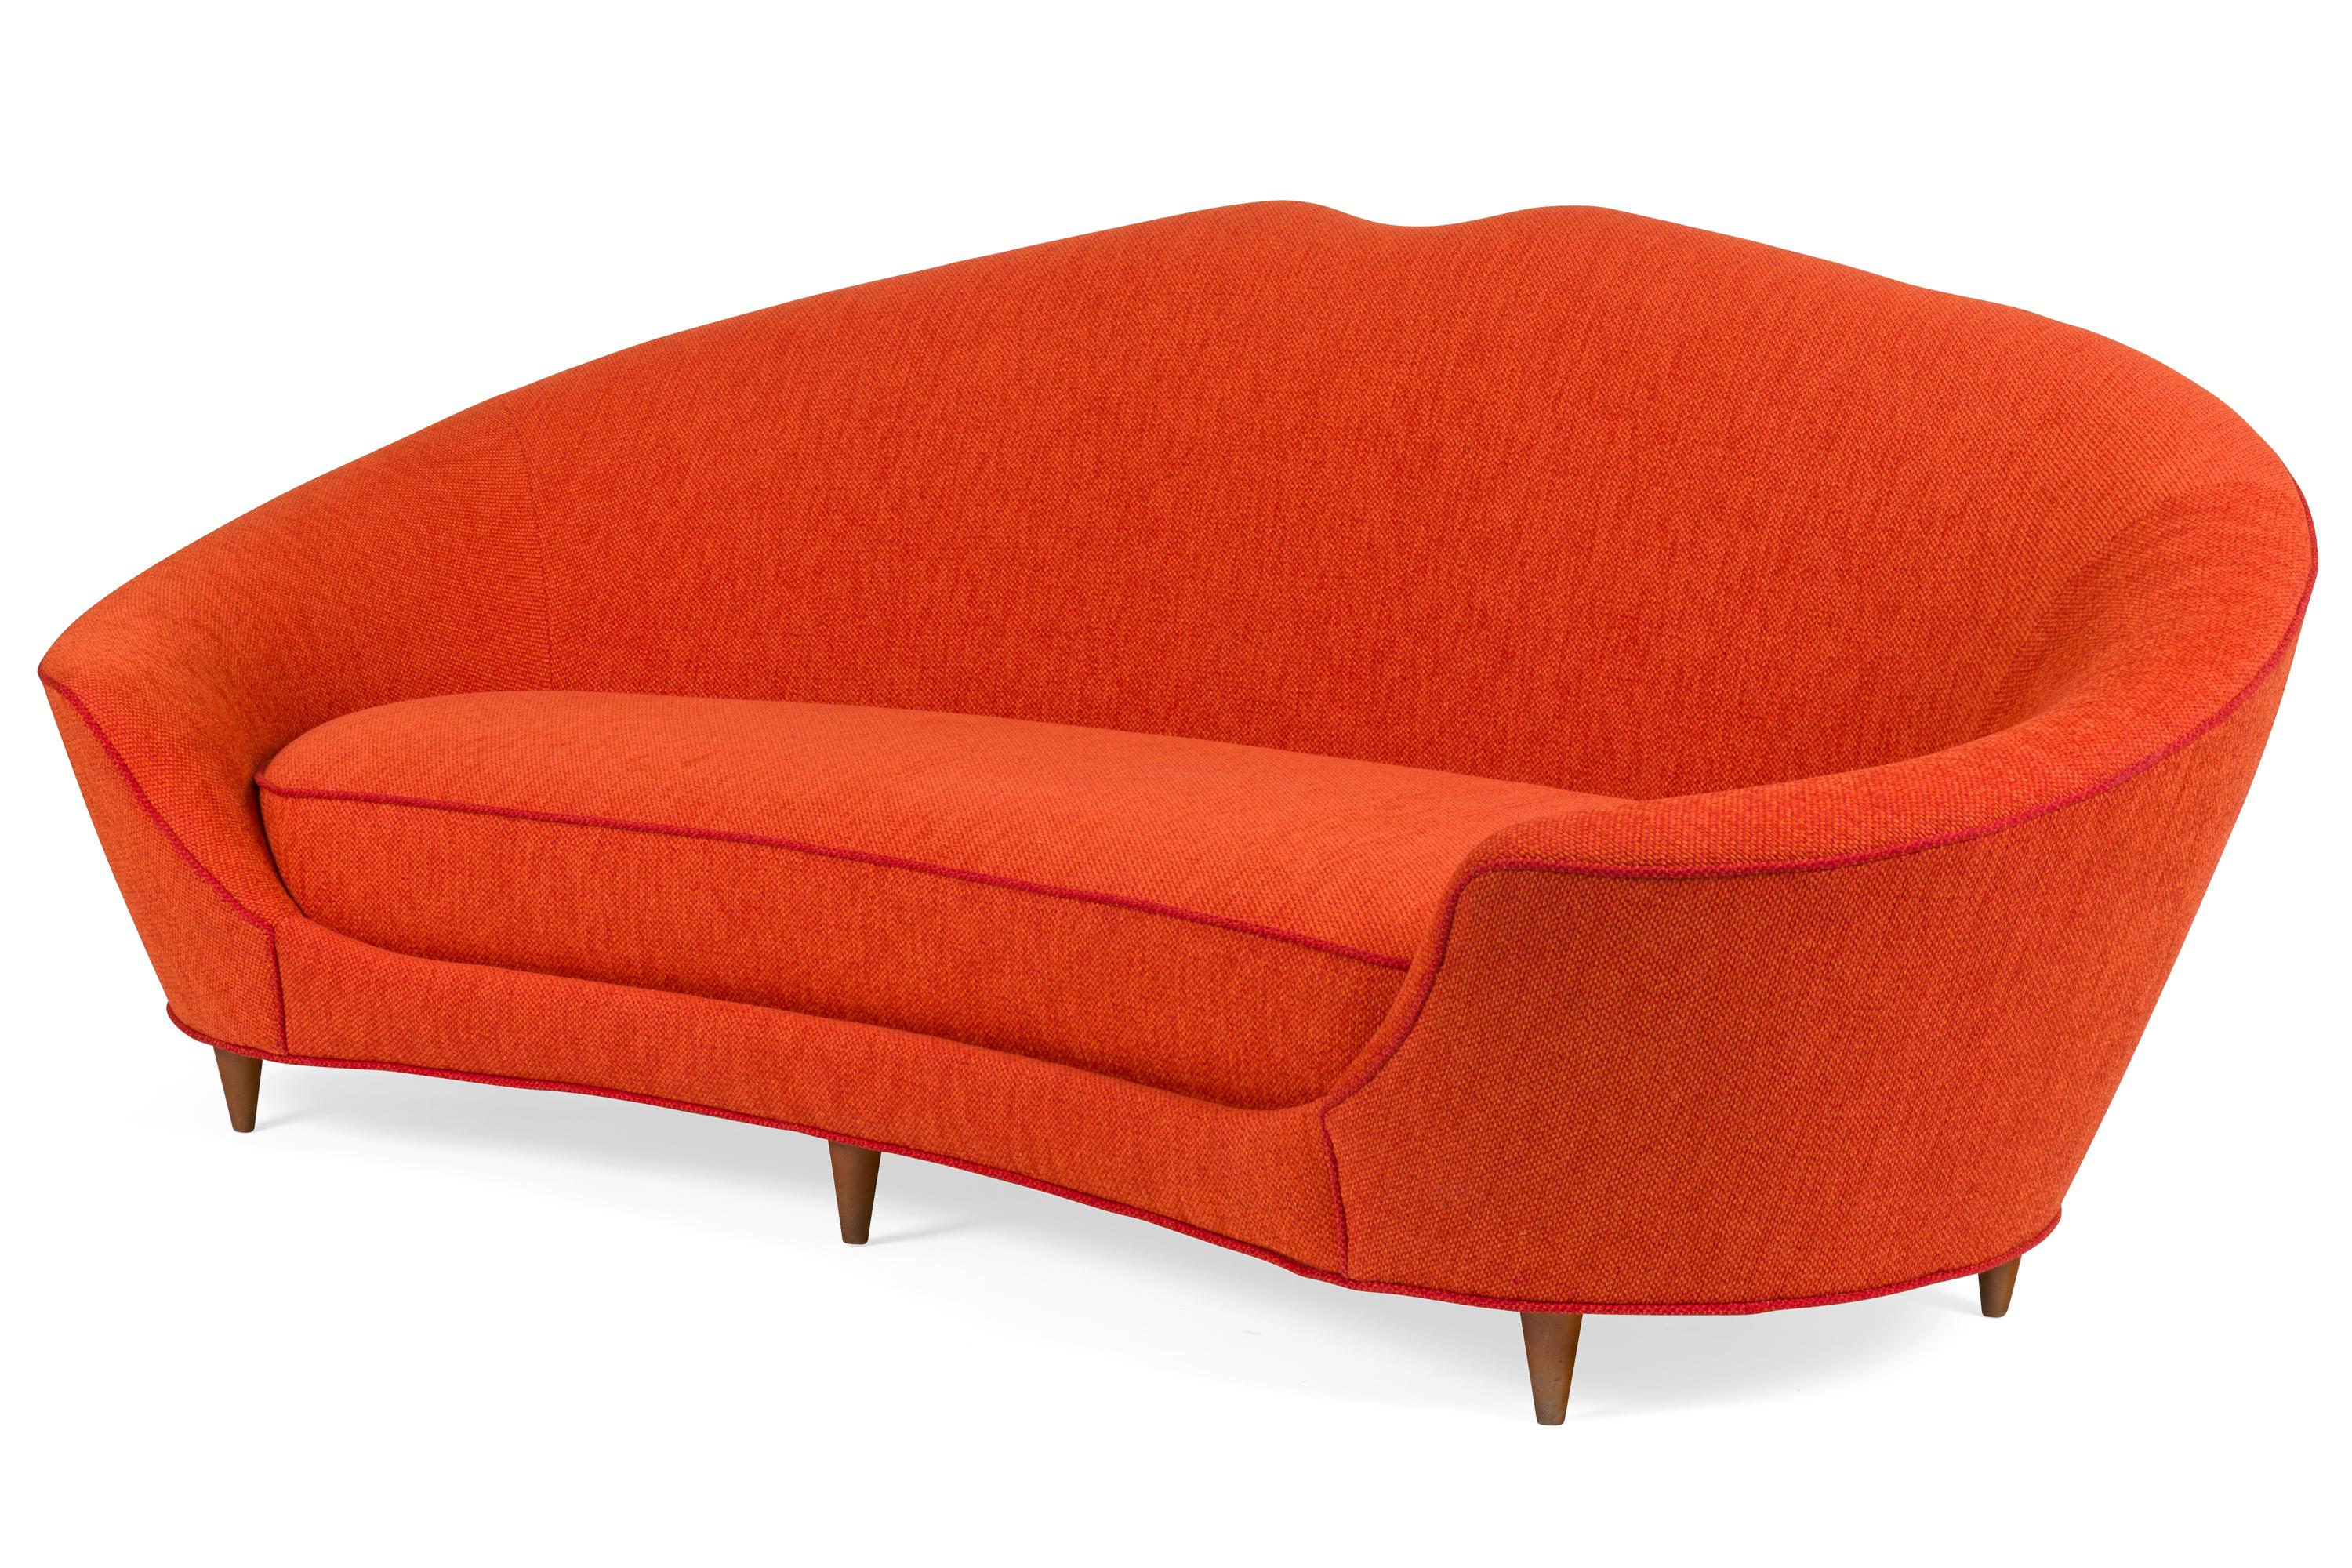 Cesare Lacca's sofas always have a distinctive dip in the center. Some are subtle as seen in this sofa and others are more emphasized as can be seen in his settees.